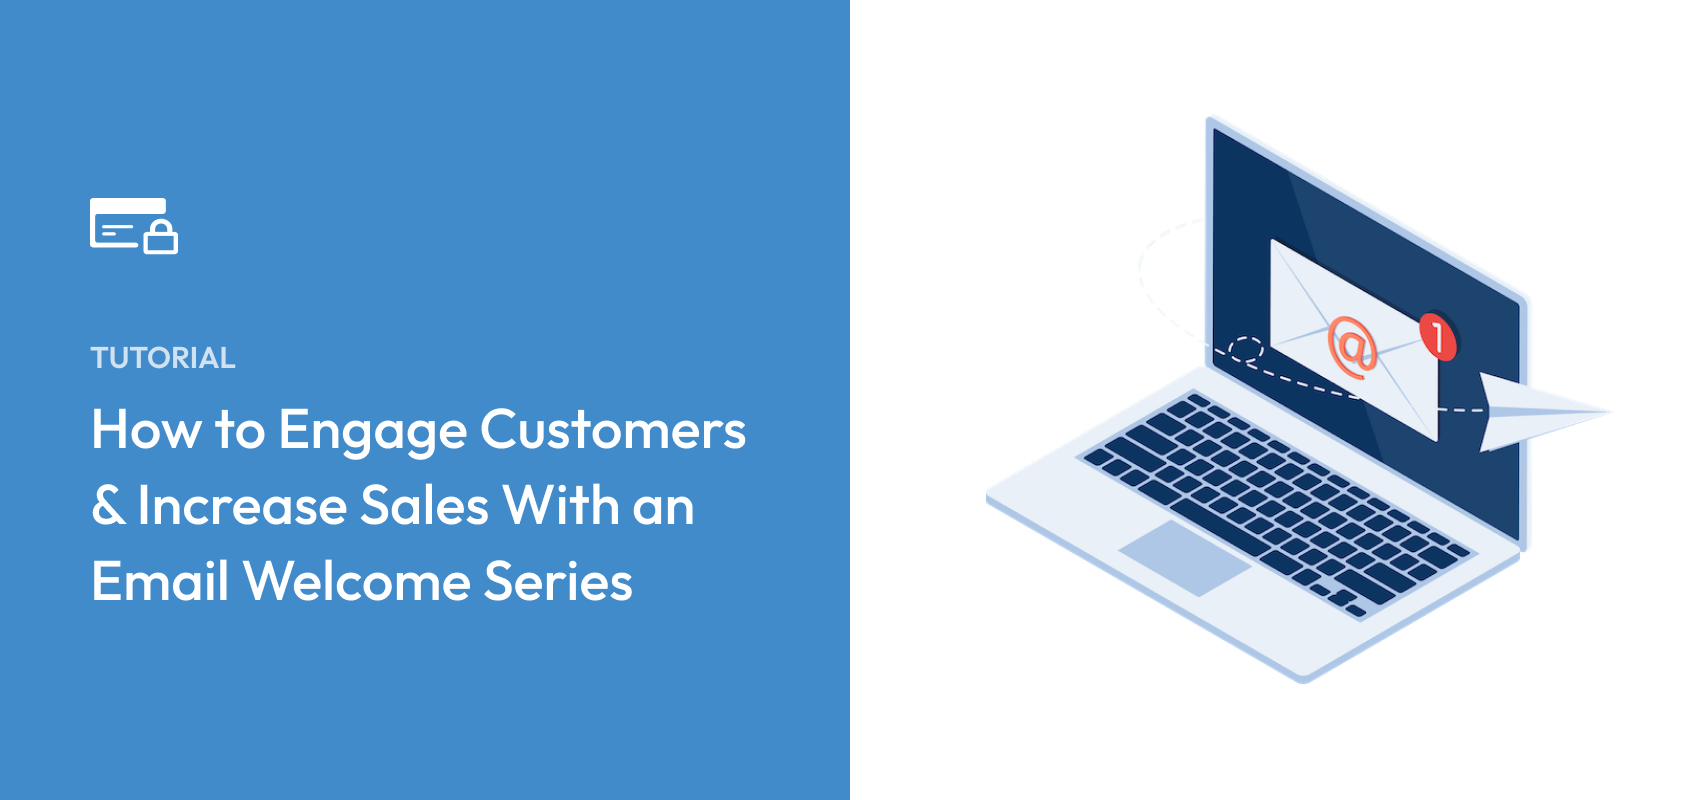 How to Engage Customers & Increase Sales With an Email Welcome Series